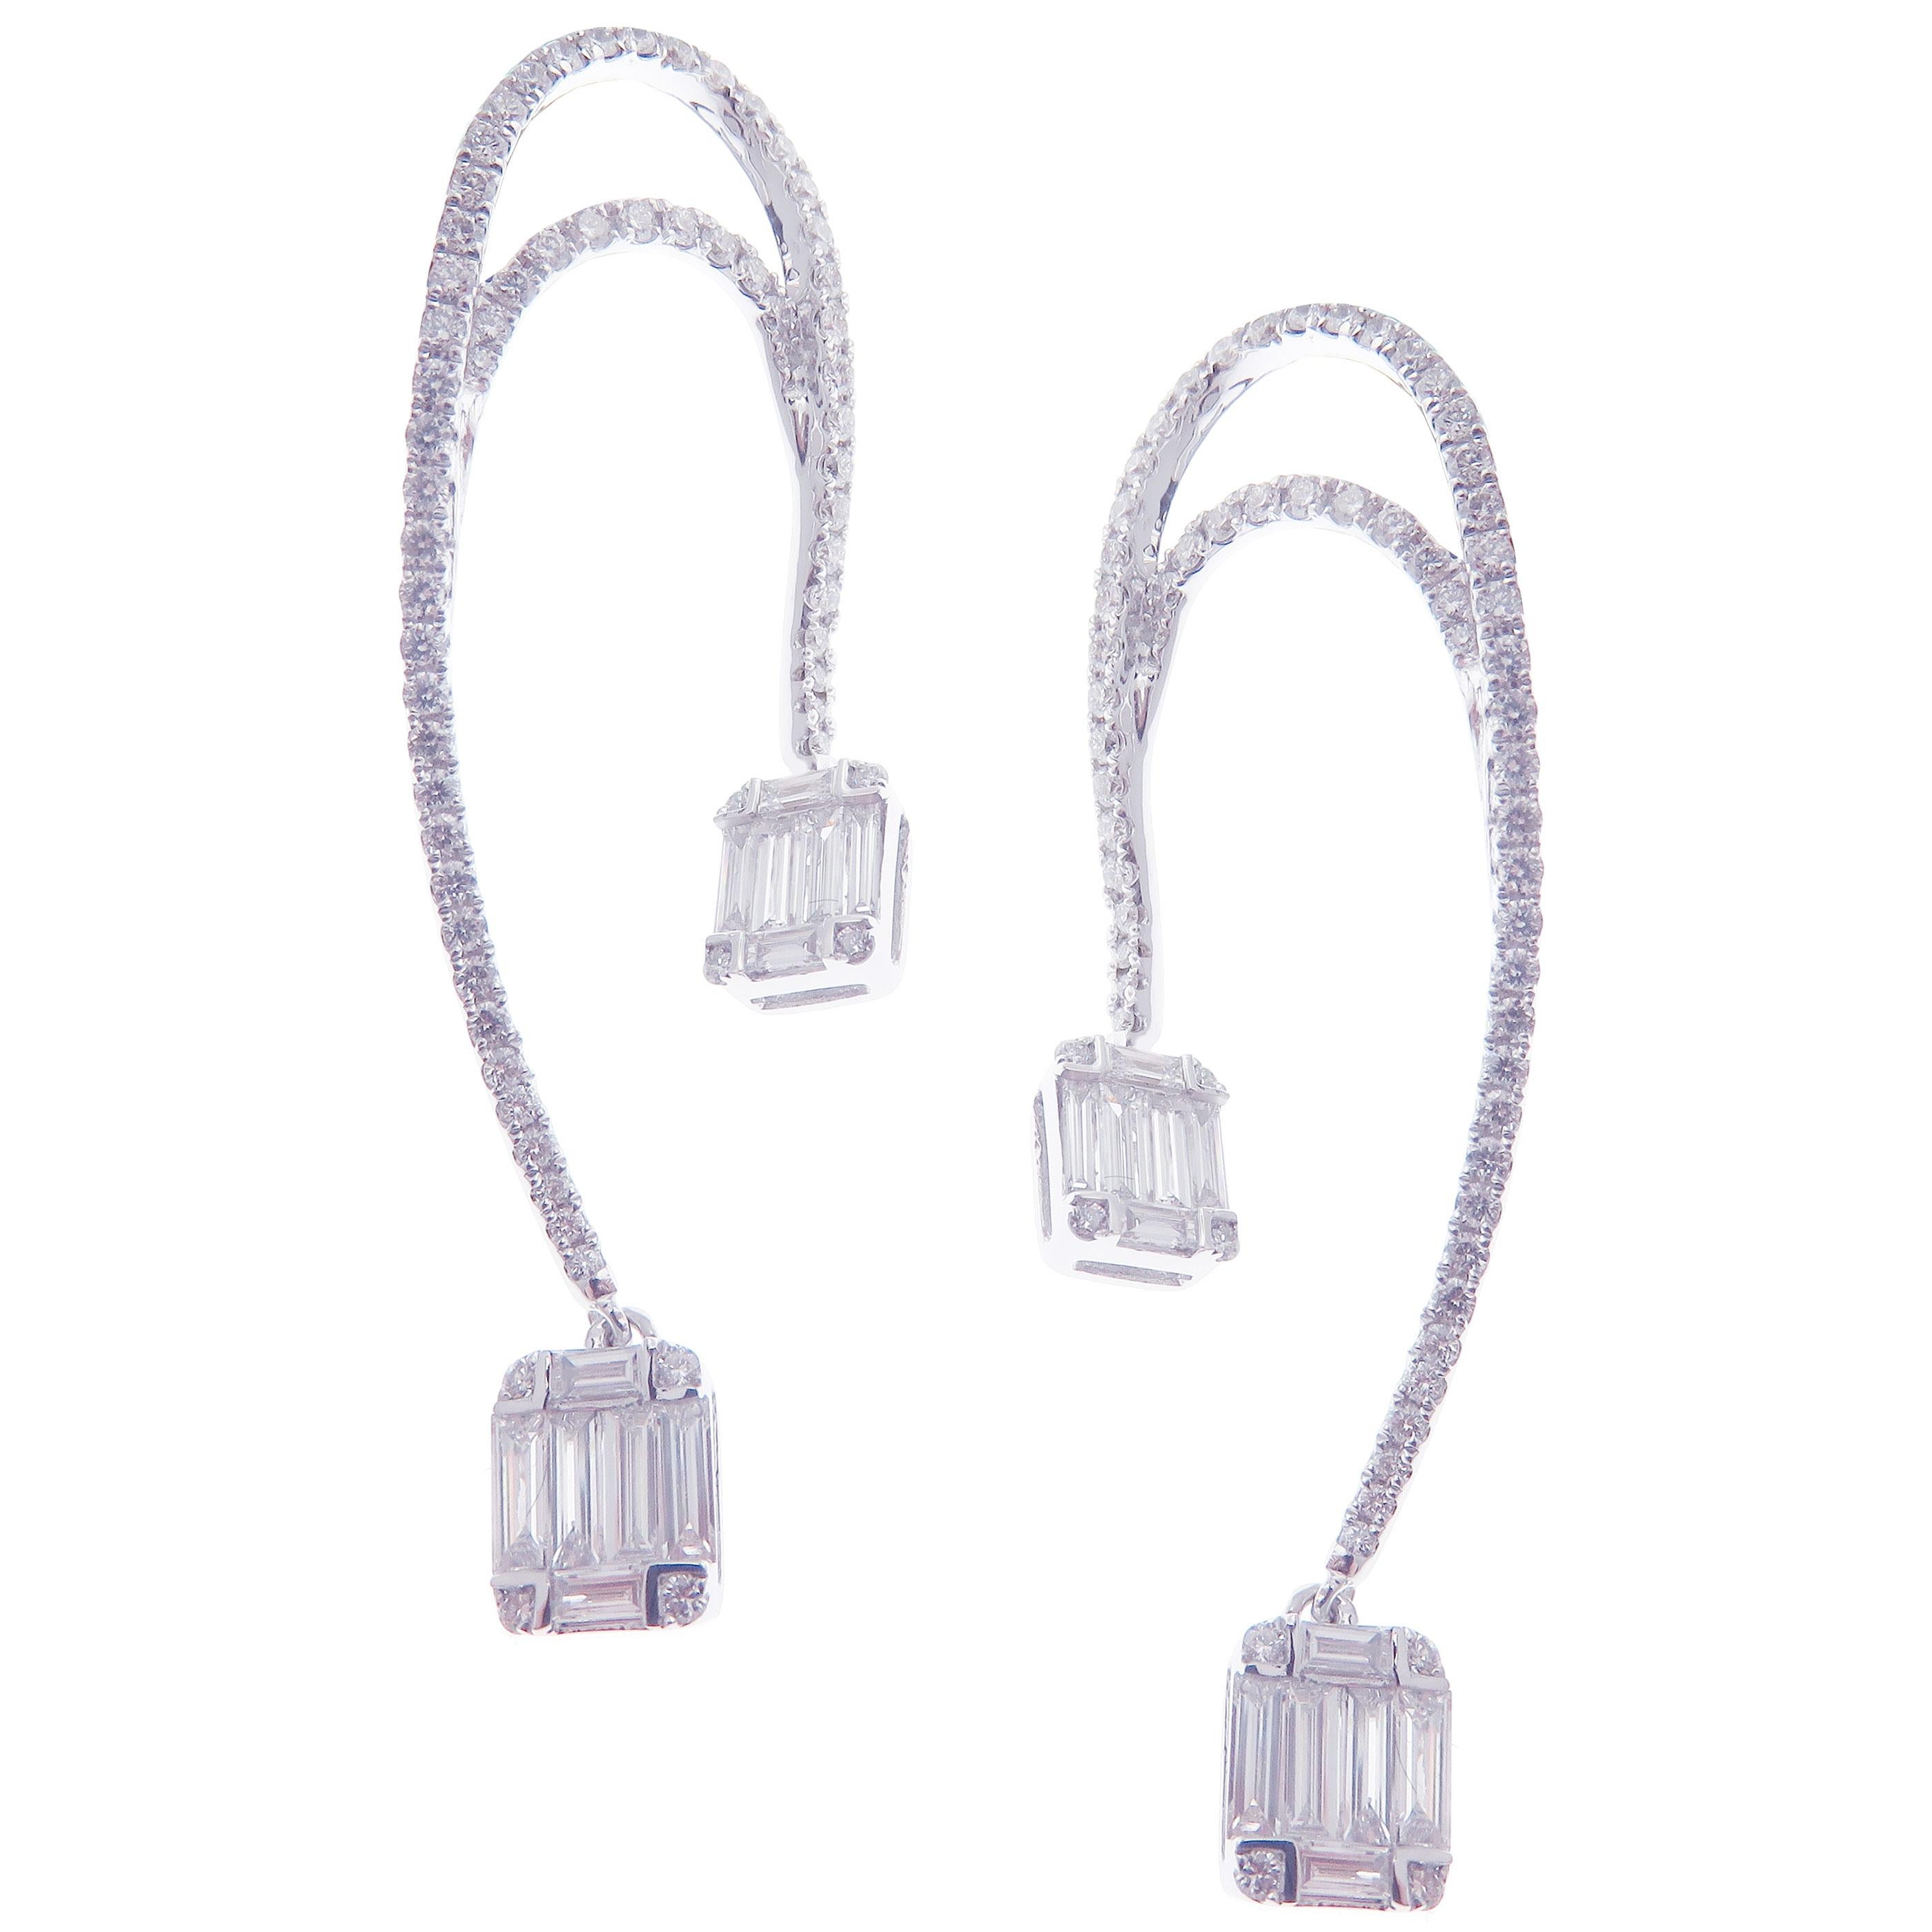 These trendy cushion-shape illusion linear dangling earrings with white baguette diamonds are crafted in 18-karat white gold, featuring 134 round white diamonds totaling of 0.83 carats and 24 baguette white diamonds totaling of 0.79 carats.
These